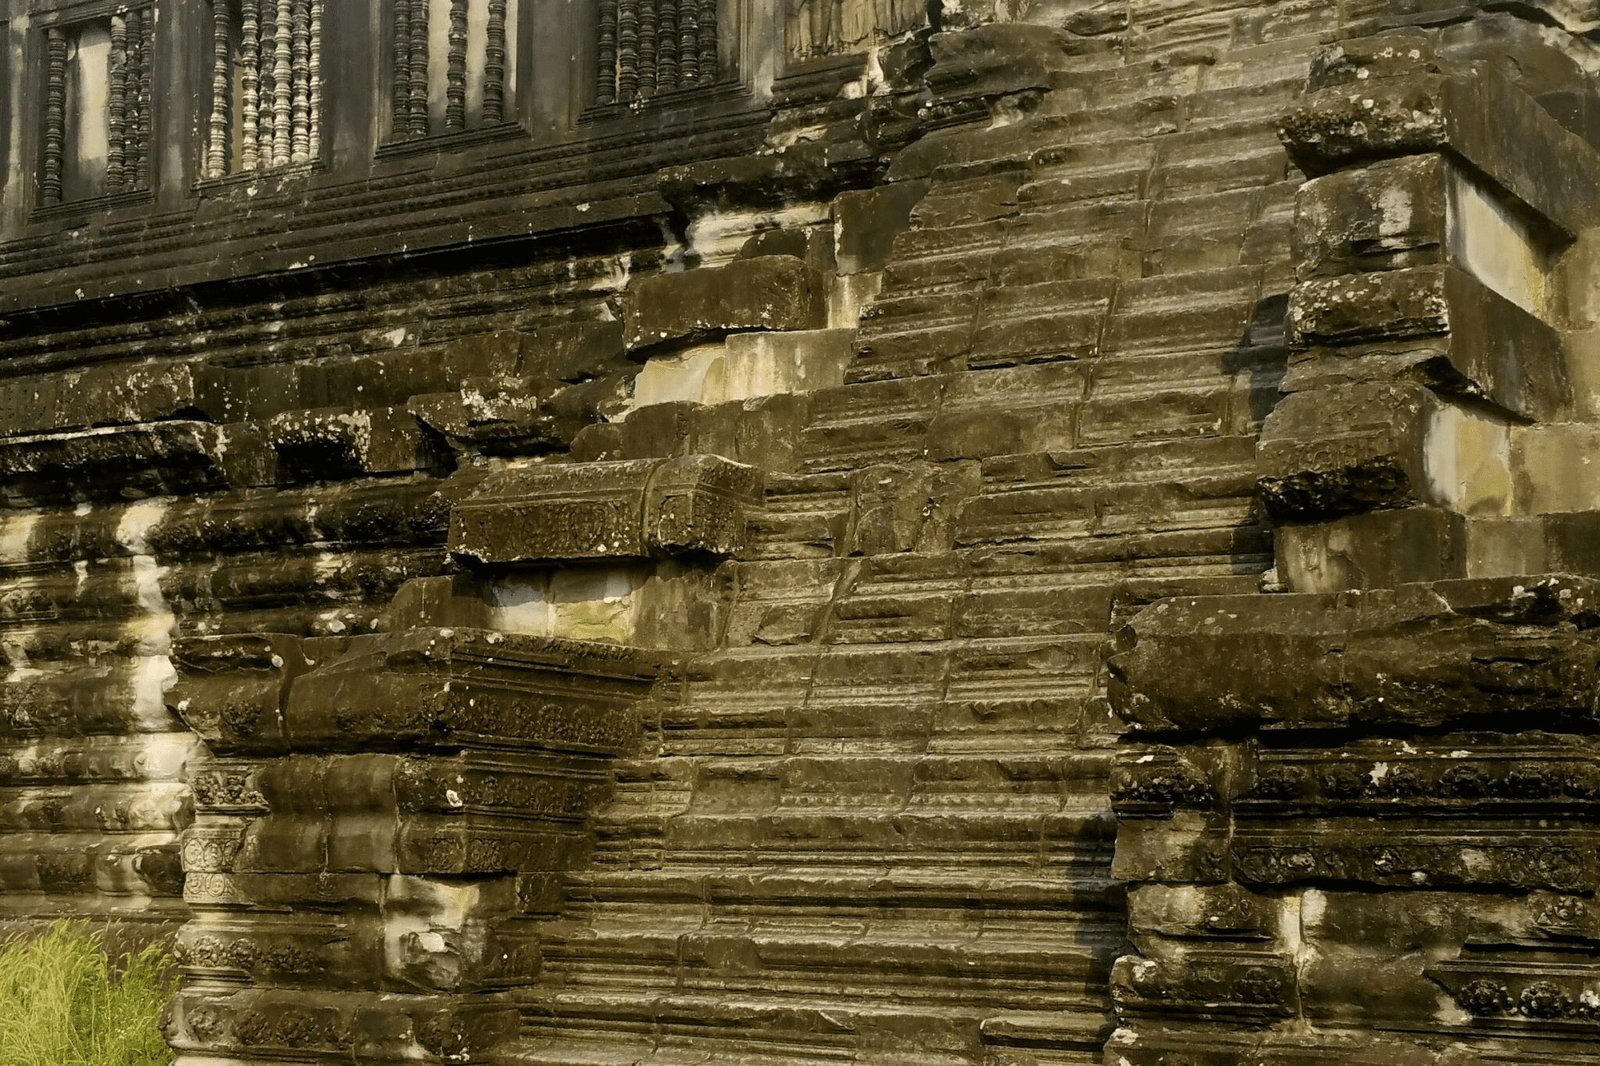 A Journey Through Time: Exploring the Temples of Angkor Archeological Park